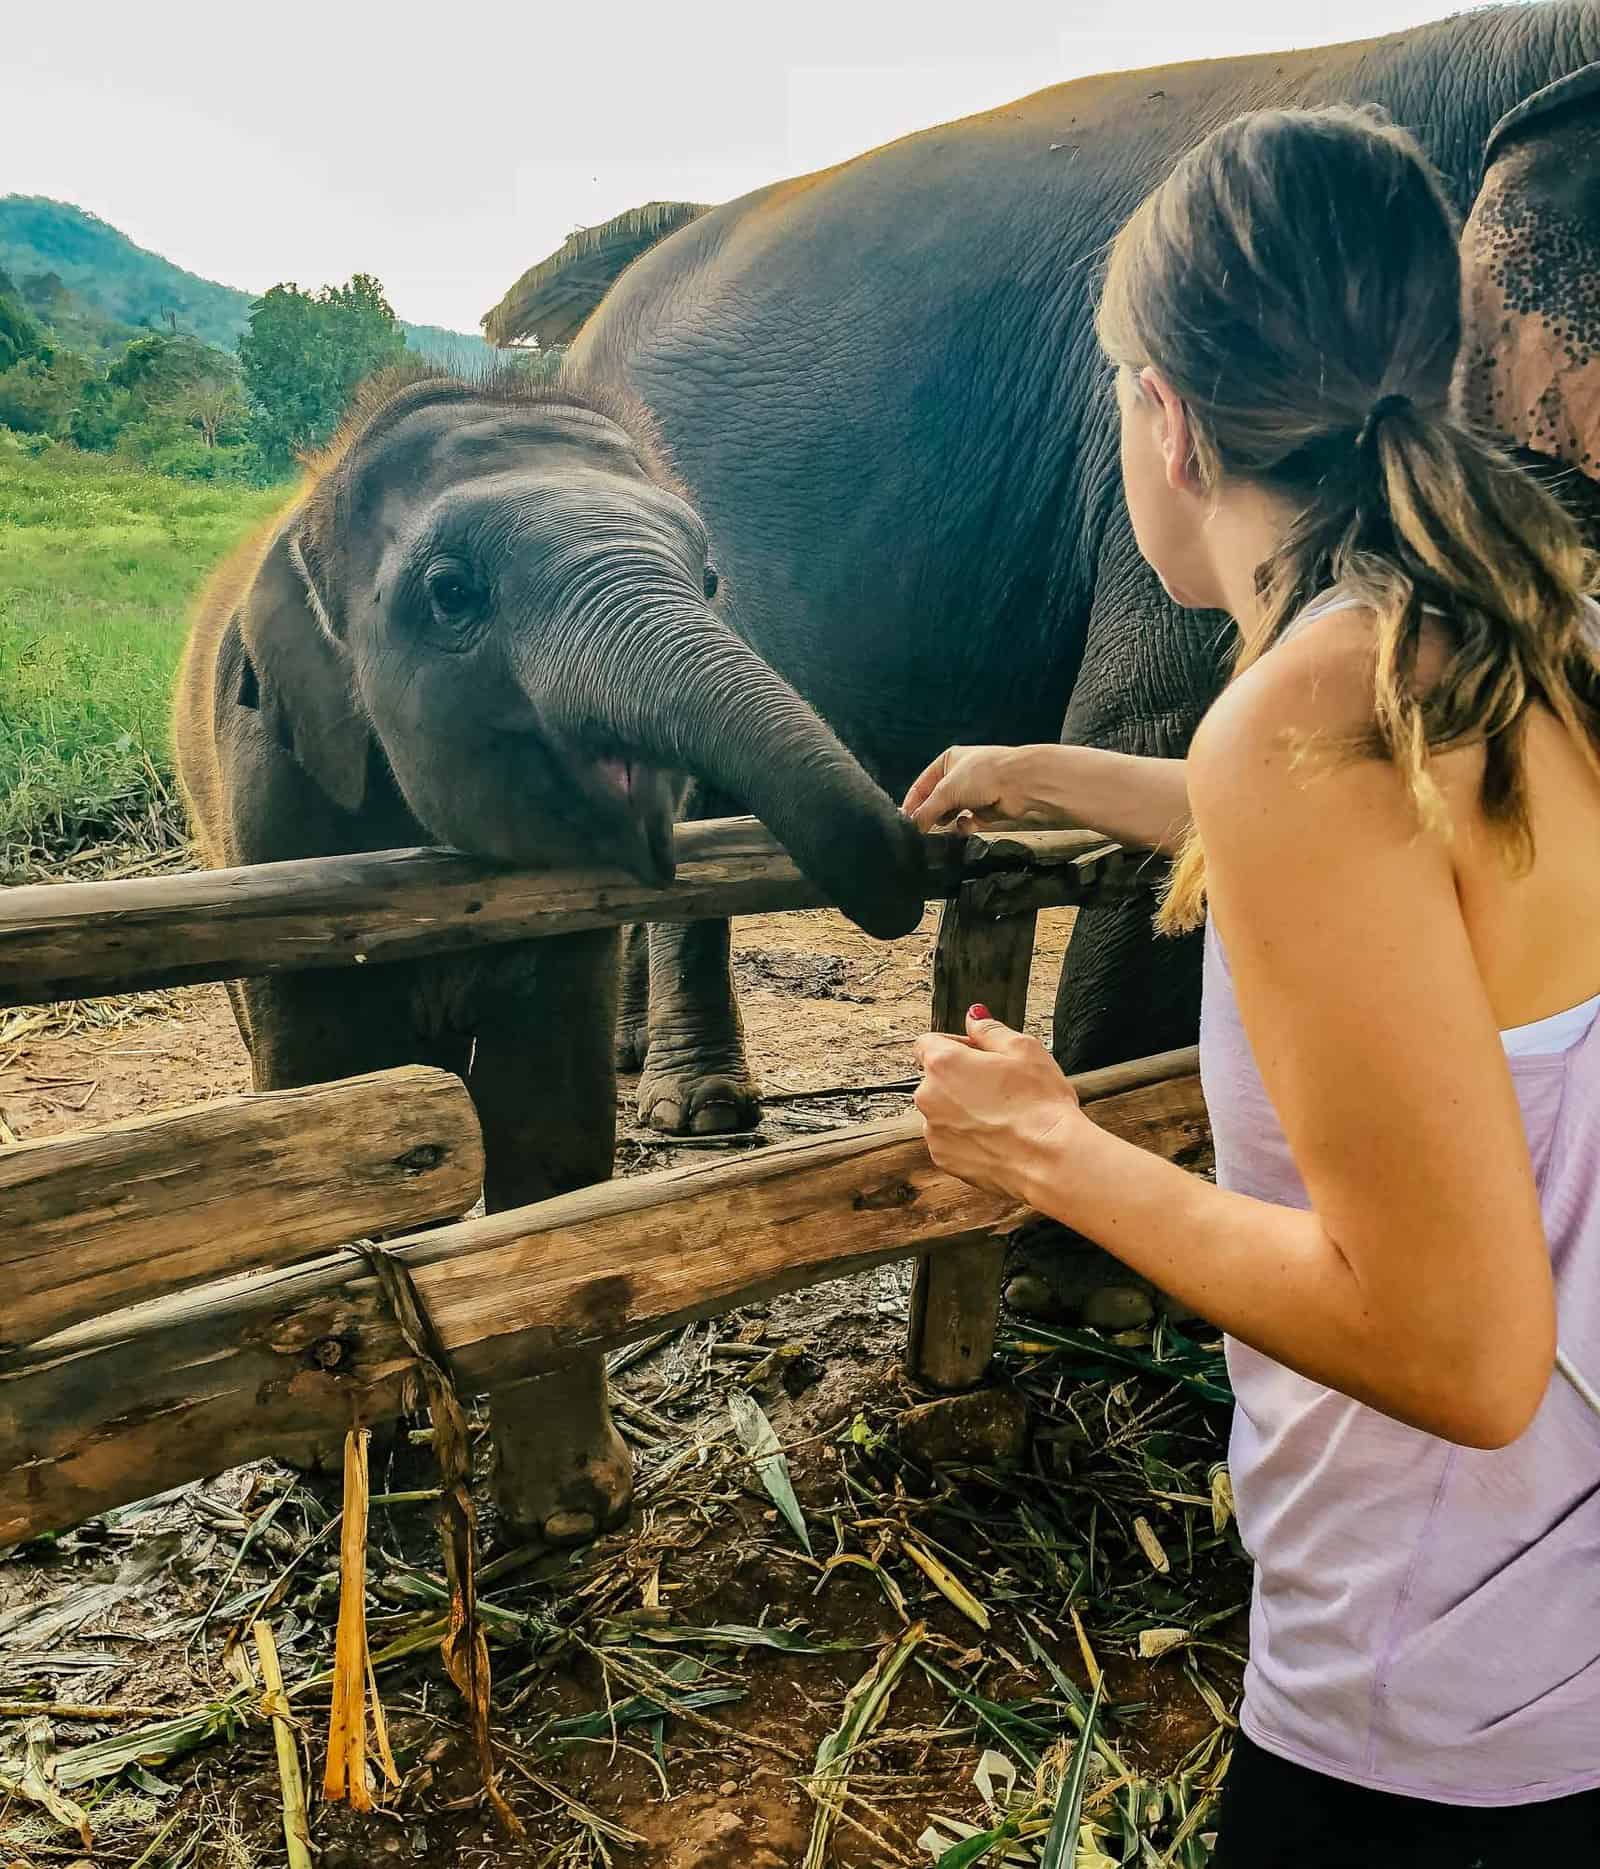 Feeding an elephant at the Elephant Nature Park in Chiang Mai